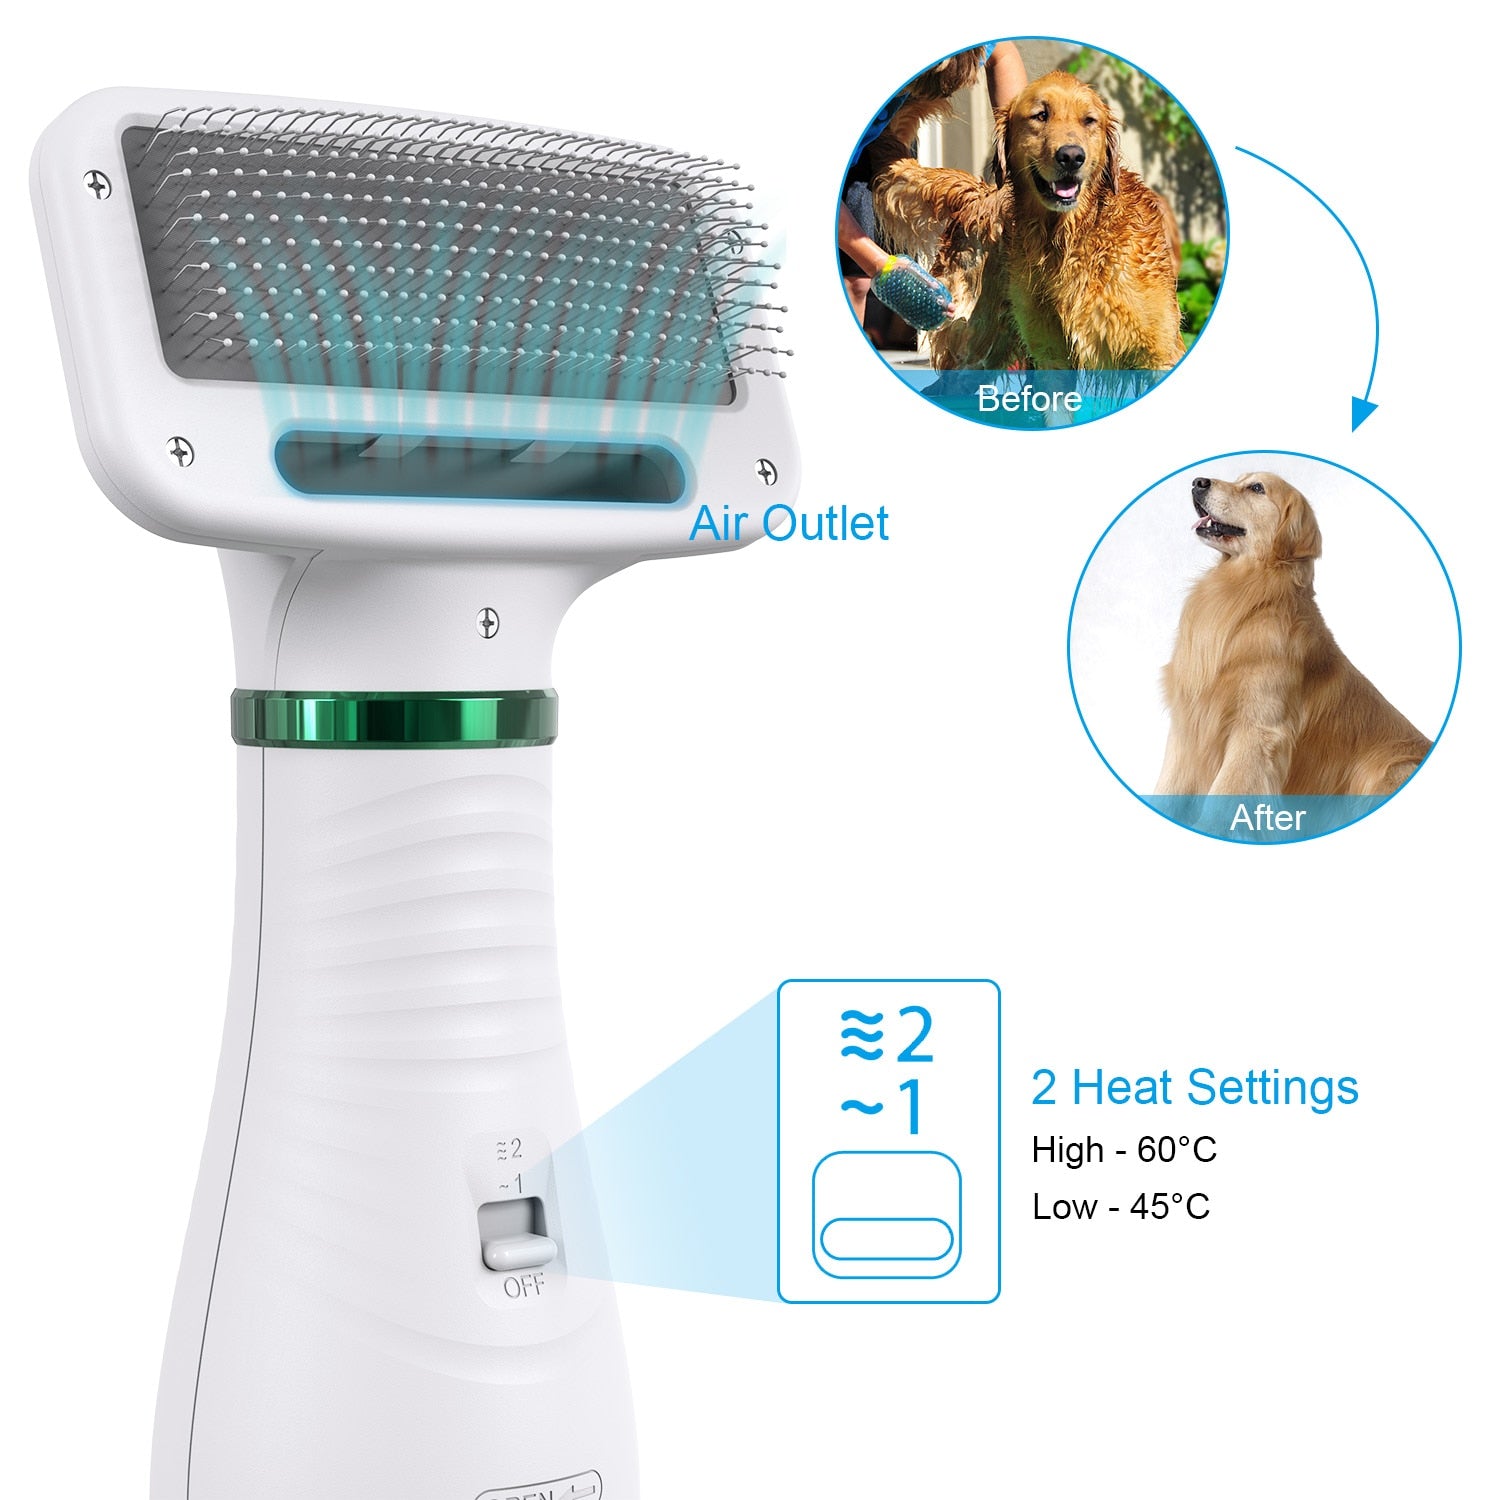 2-In-1 Portable Pet Hair Dryer And Comb Brush